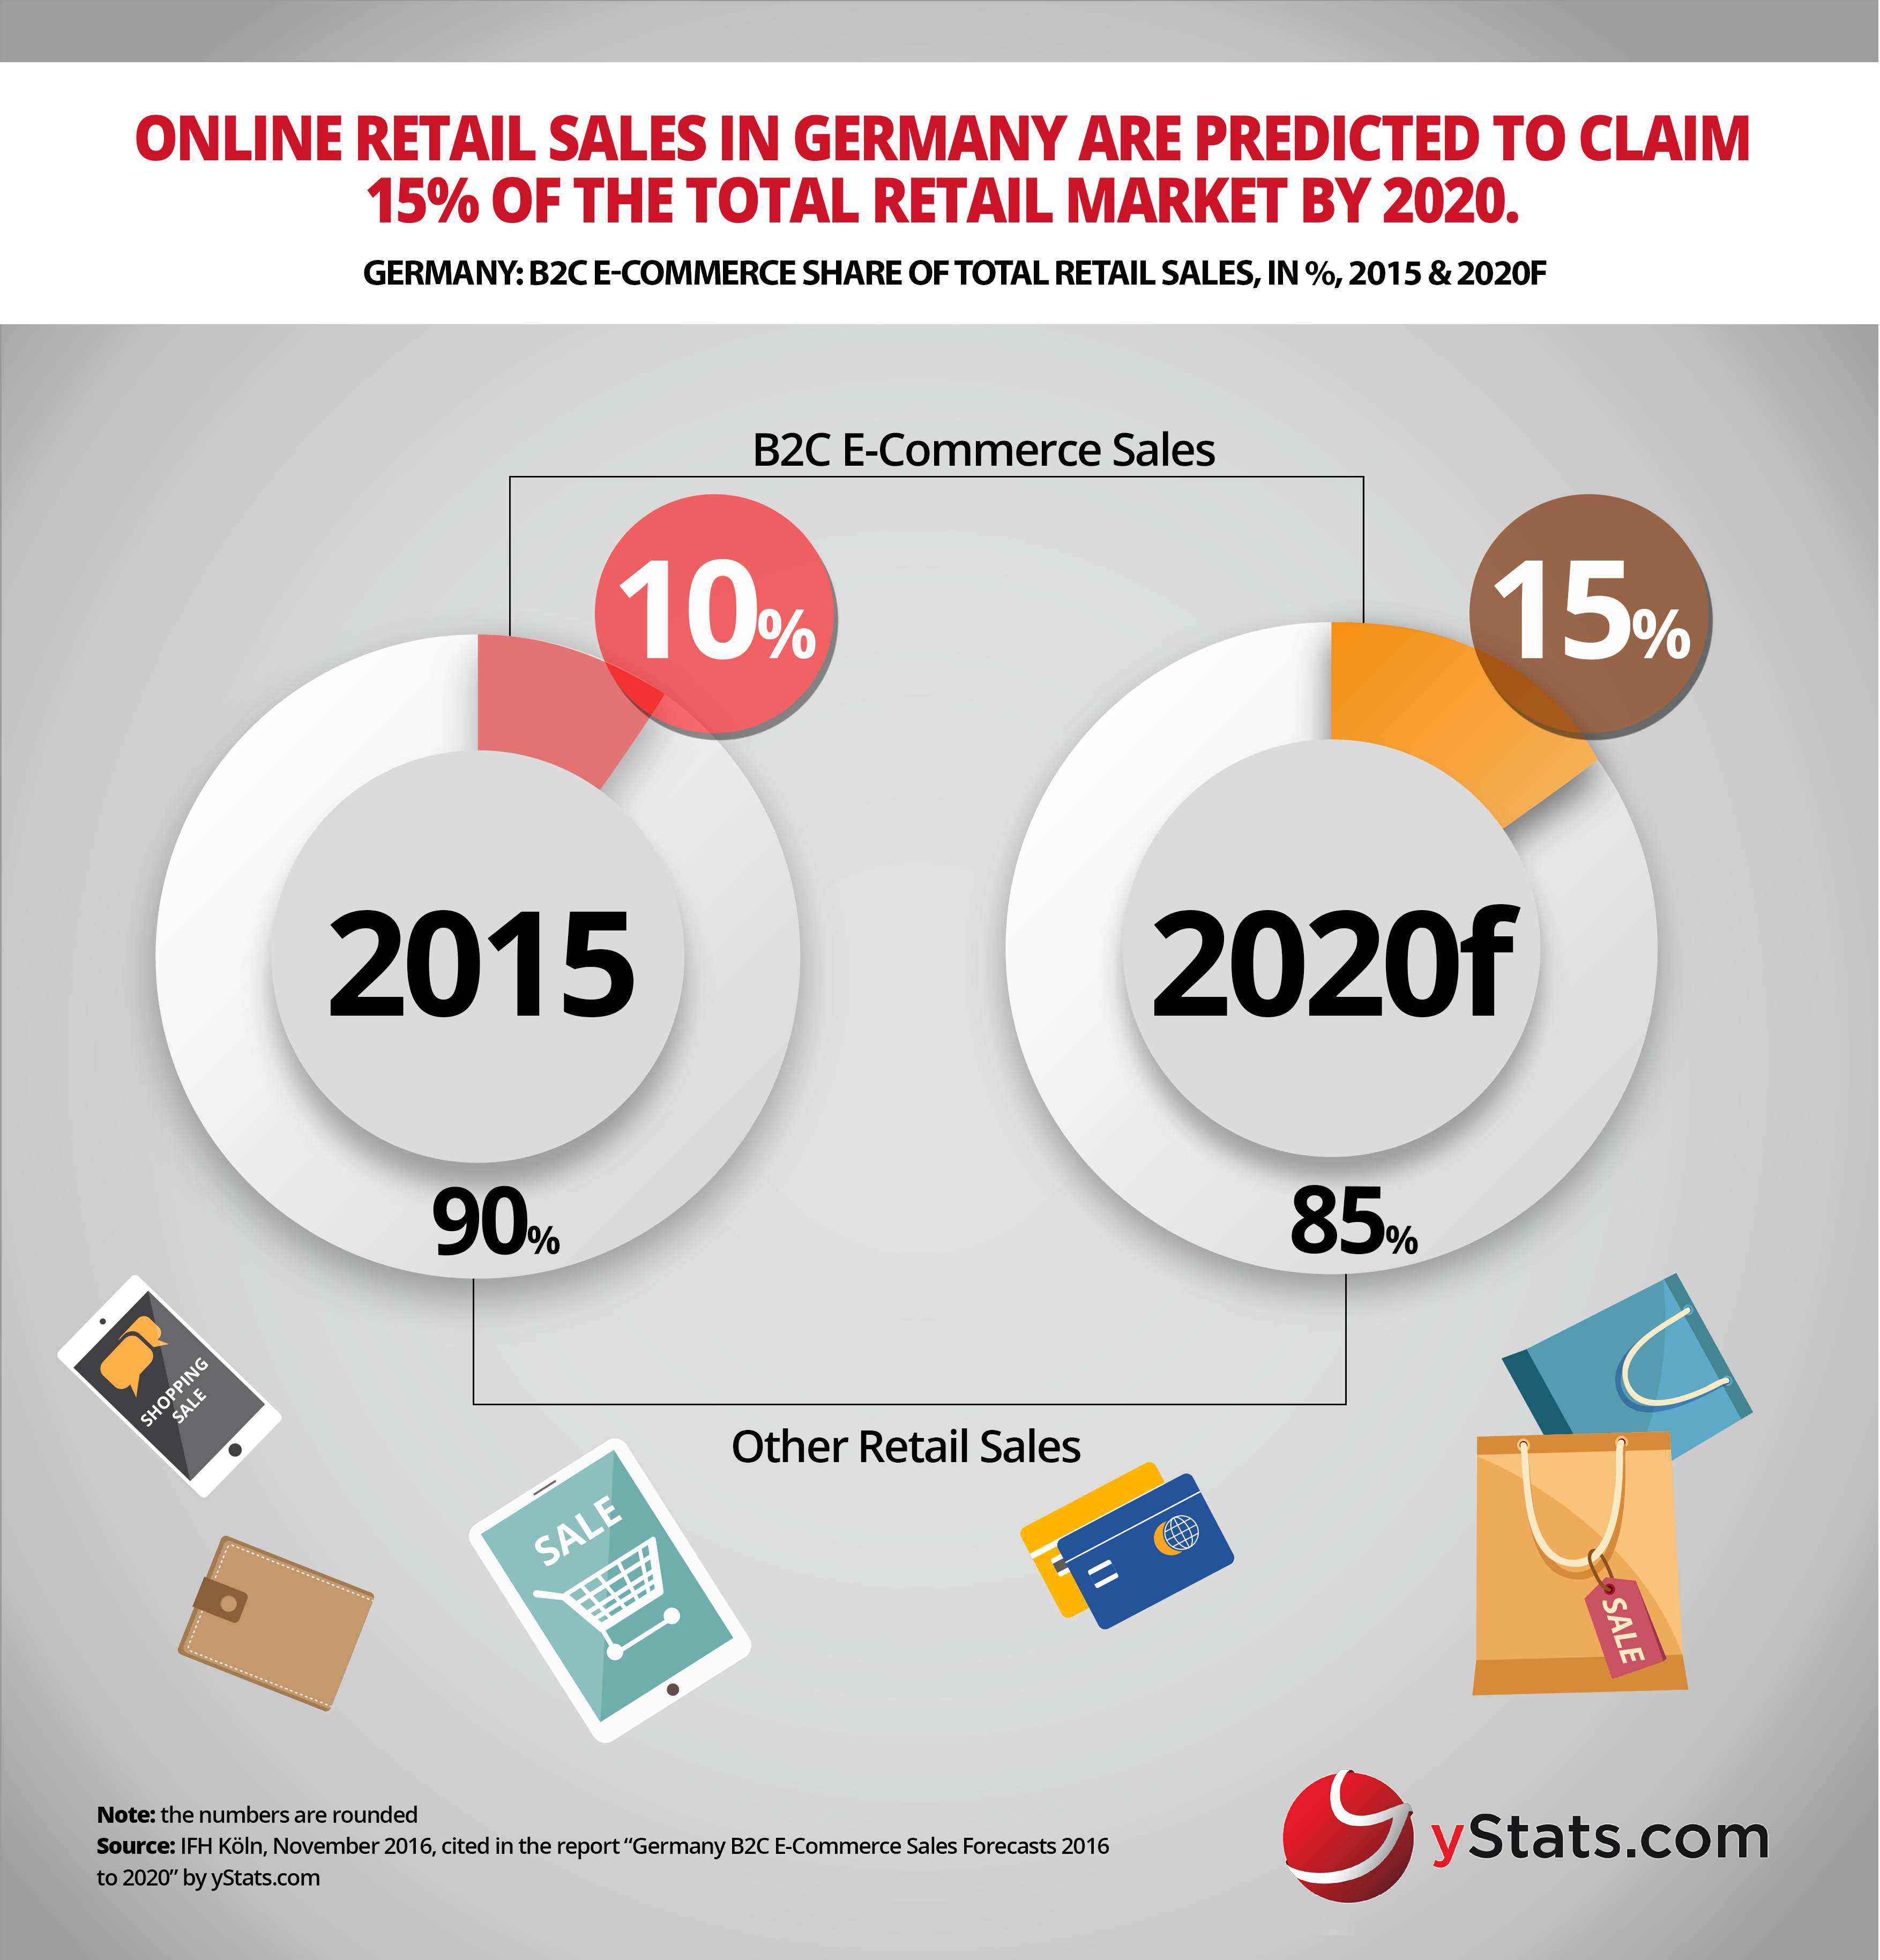 ecommerce share of retail sales germany